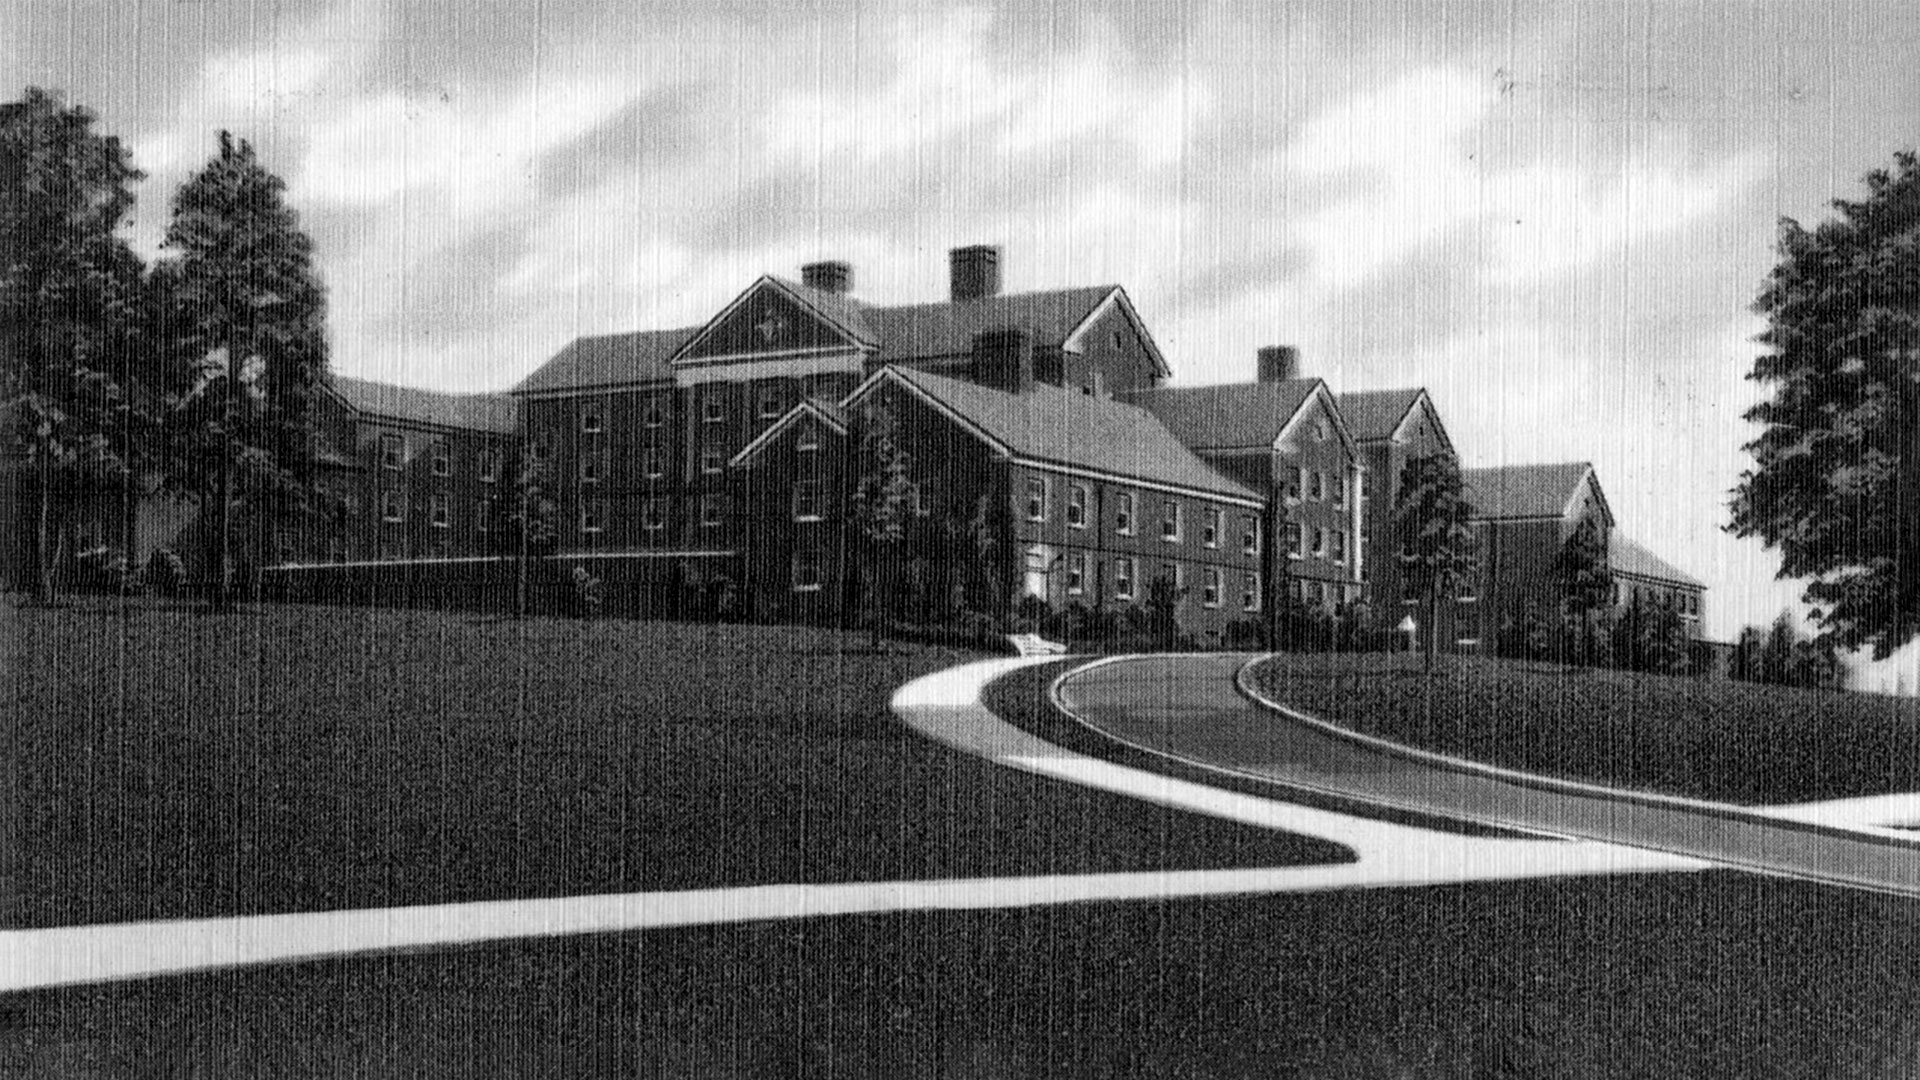 Atherton Hall in the 1930s and 40s